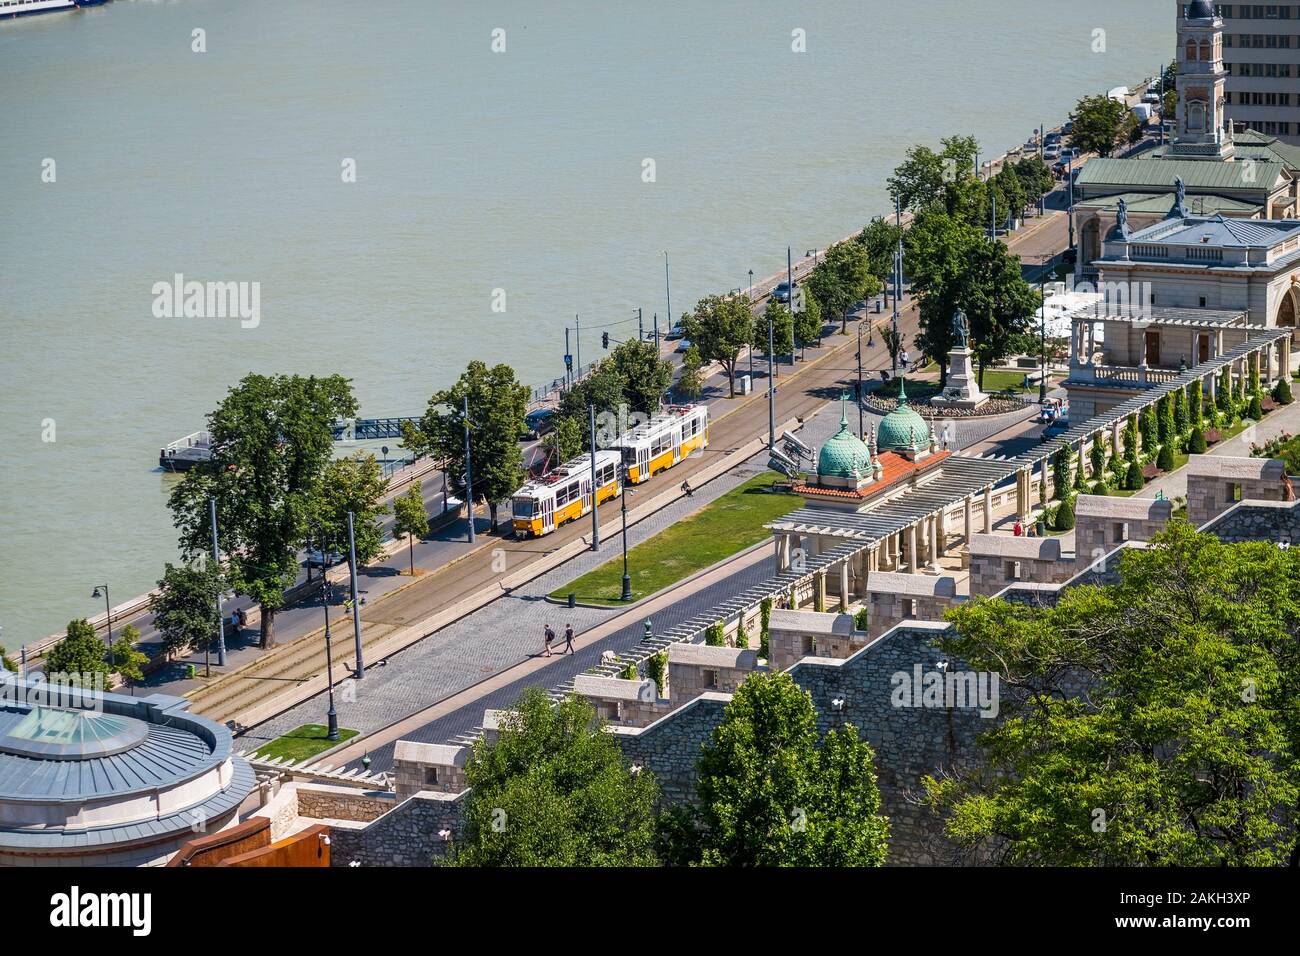 Hungary, Budapest, view of the quays of the Buda district and the tramway Stock Photo